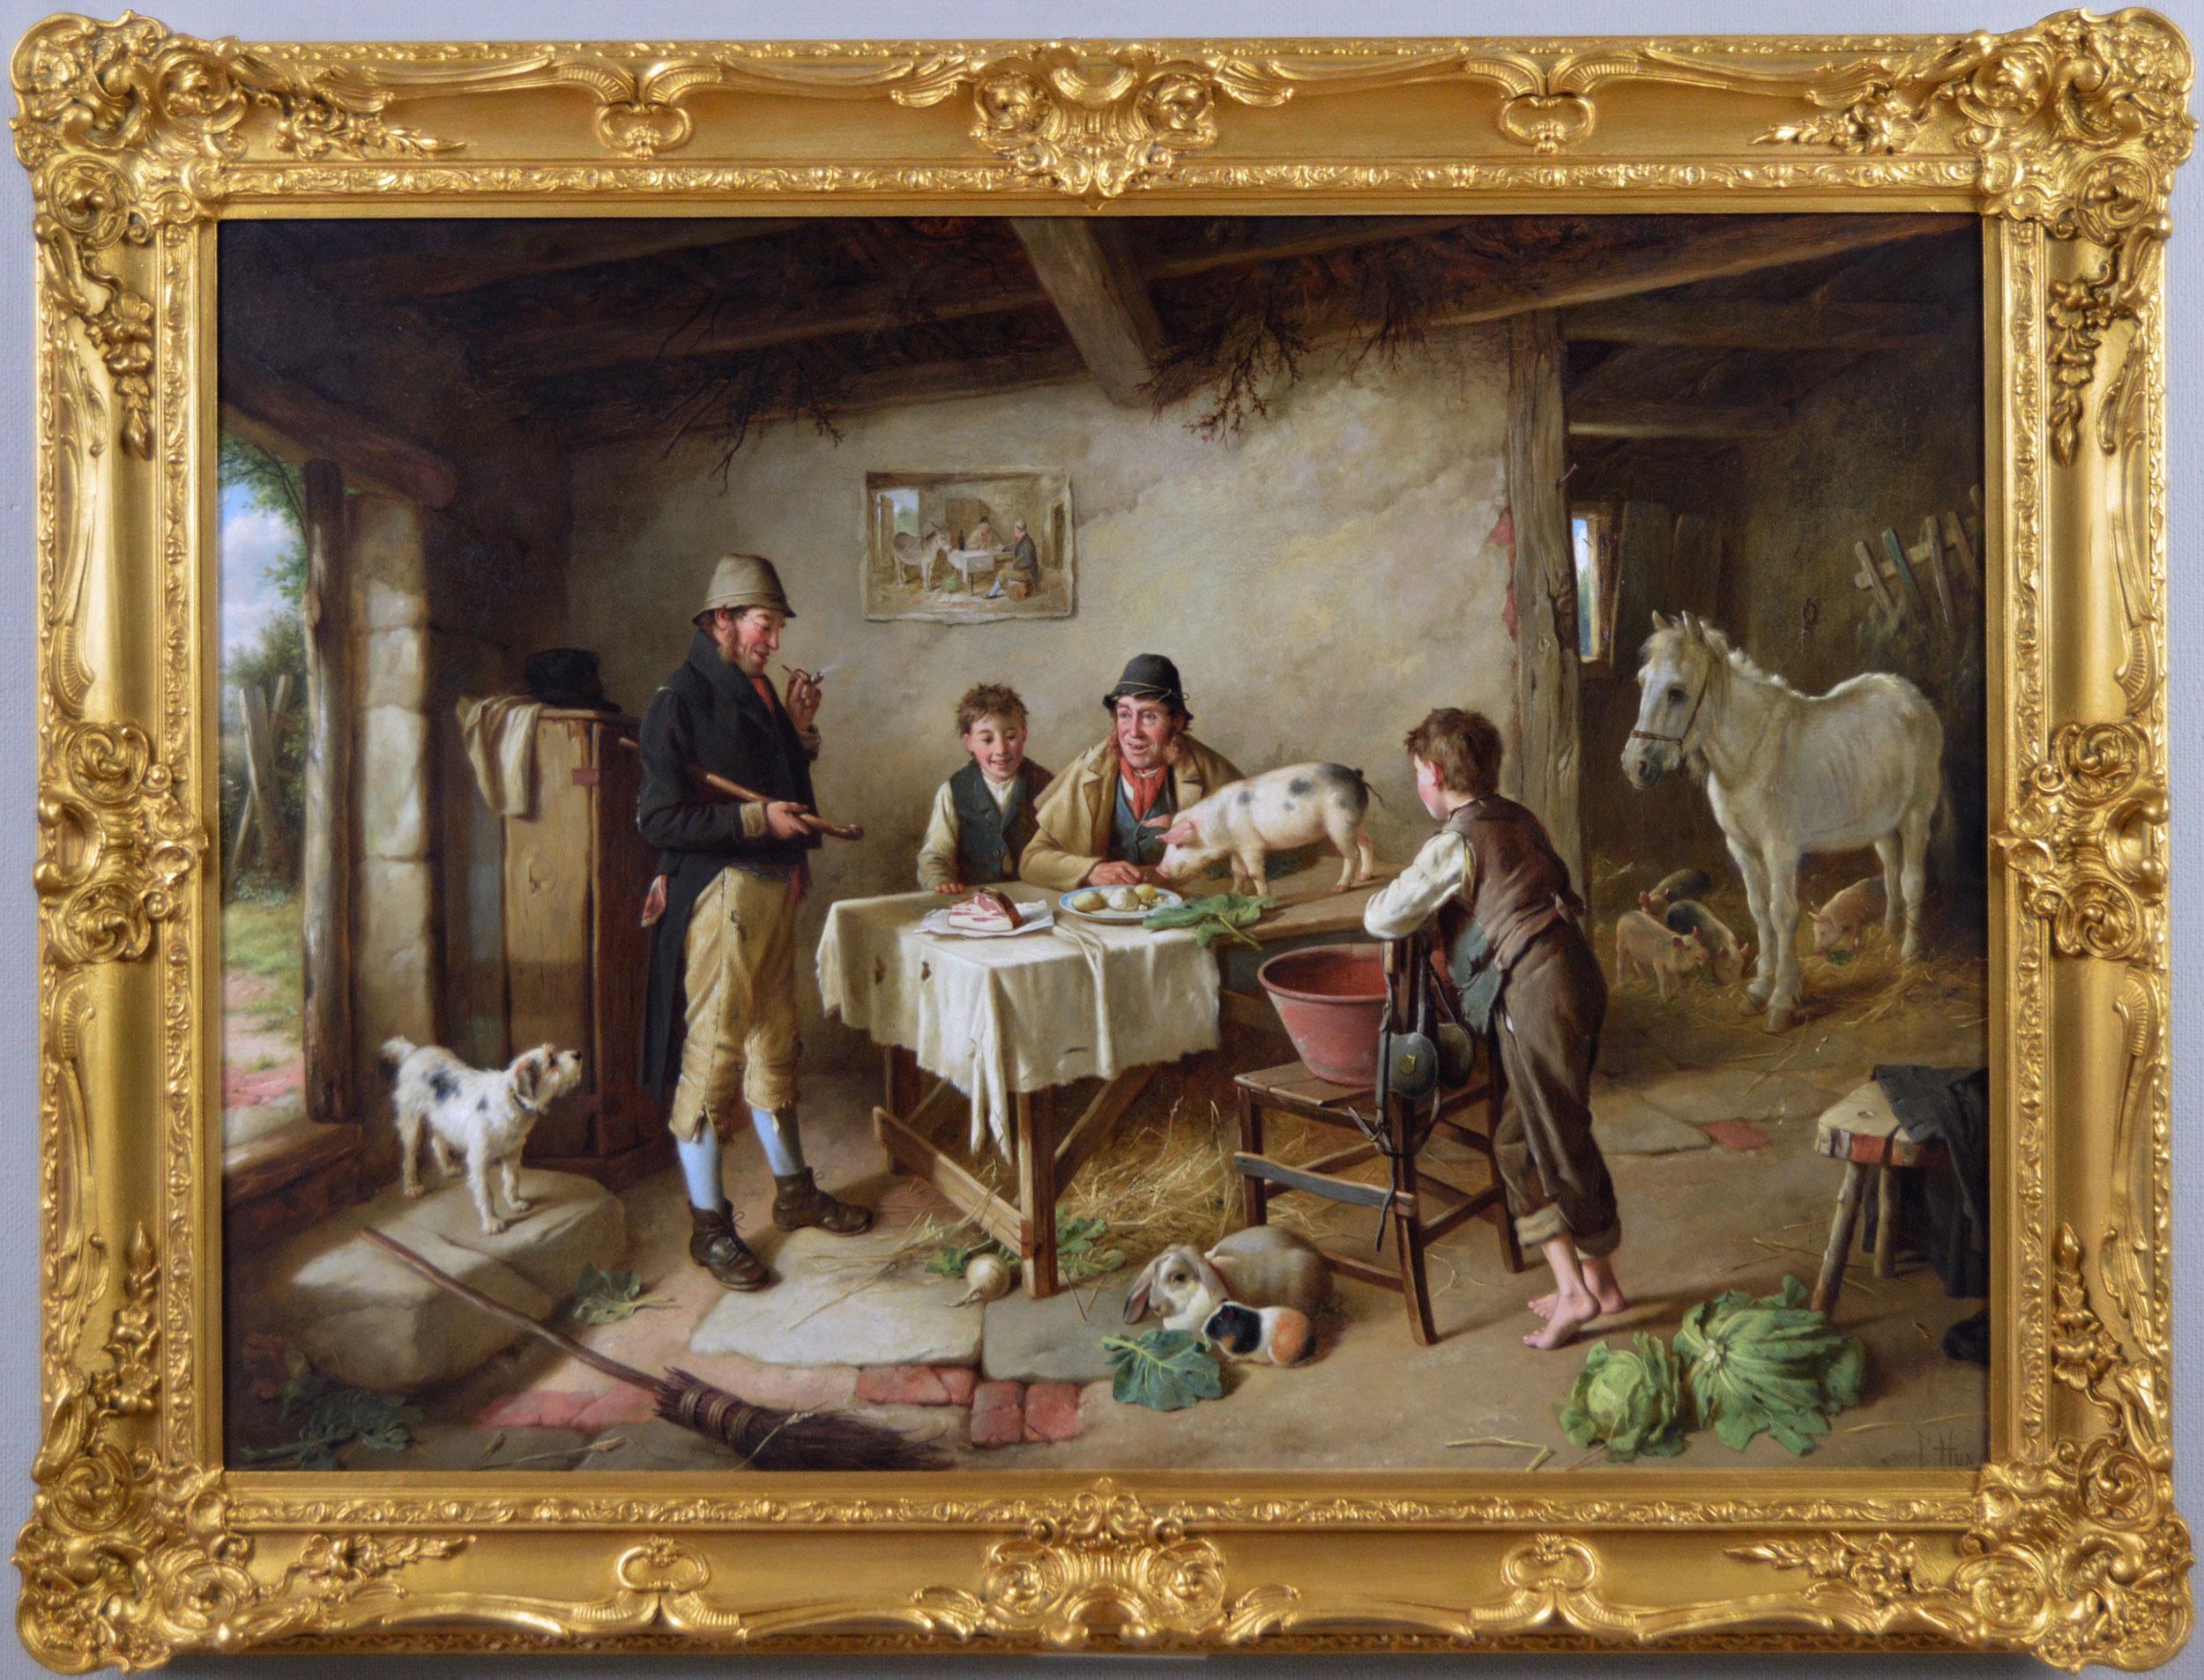 Charles Hunt Jnr Figurative Painting - 19th Century genre oil painting of figures in a cottage with animals